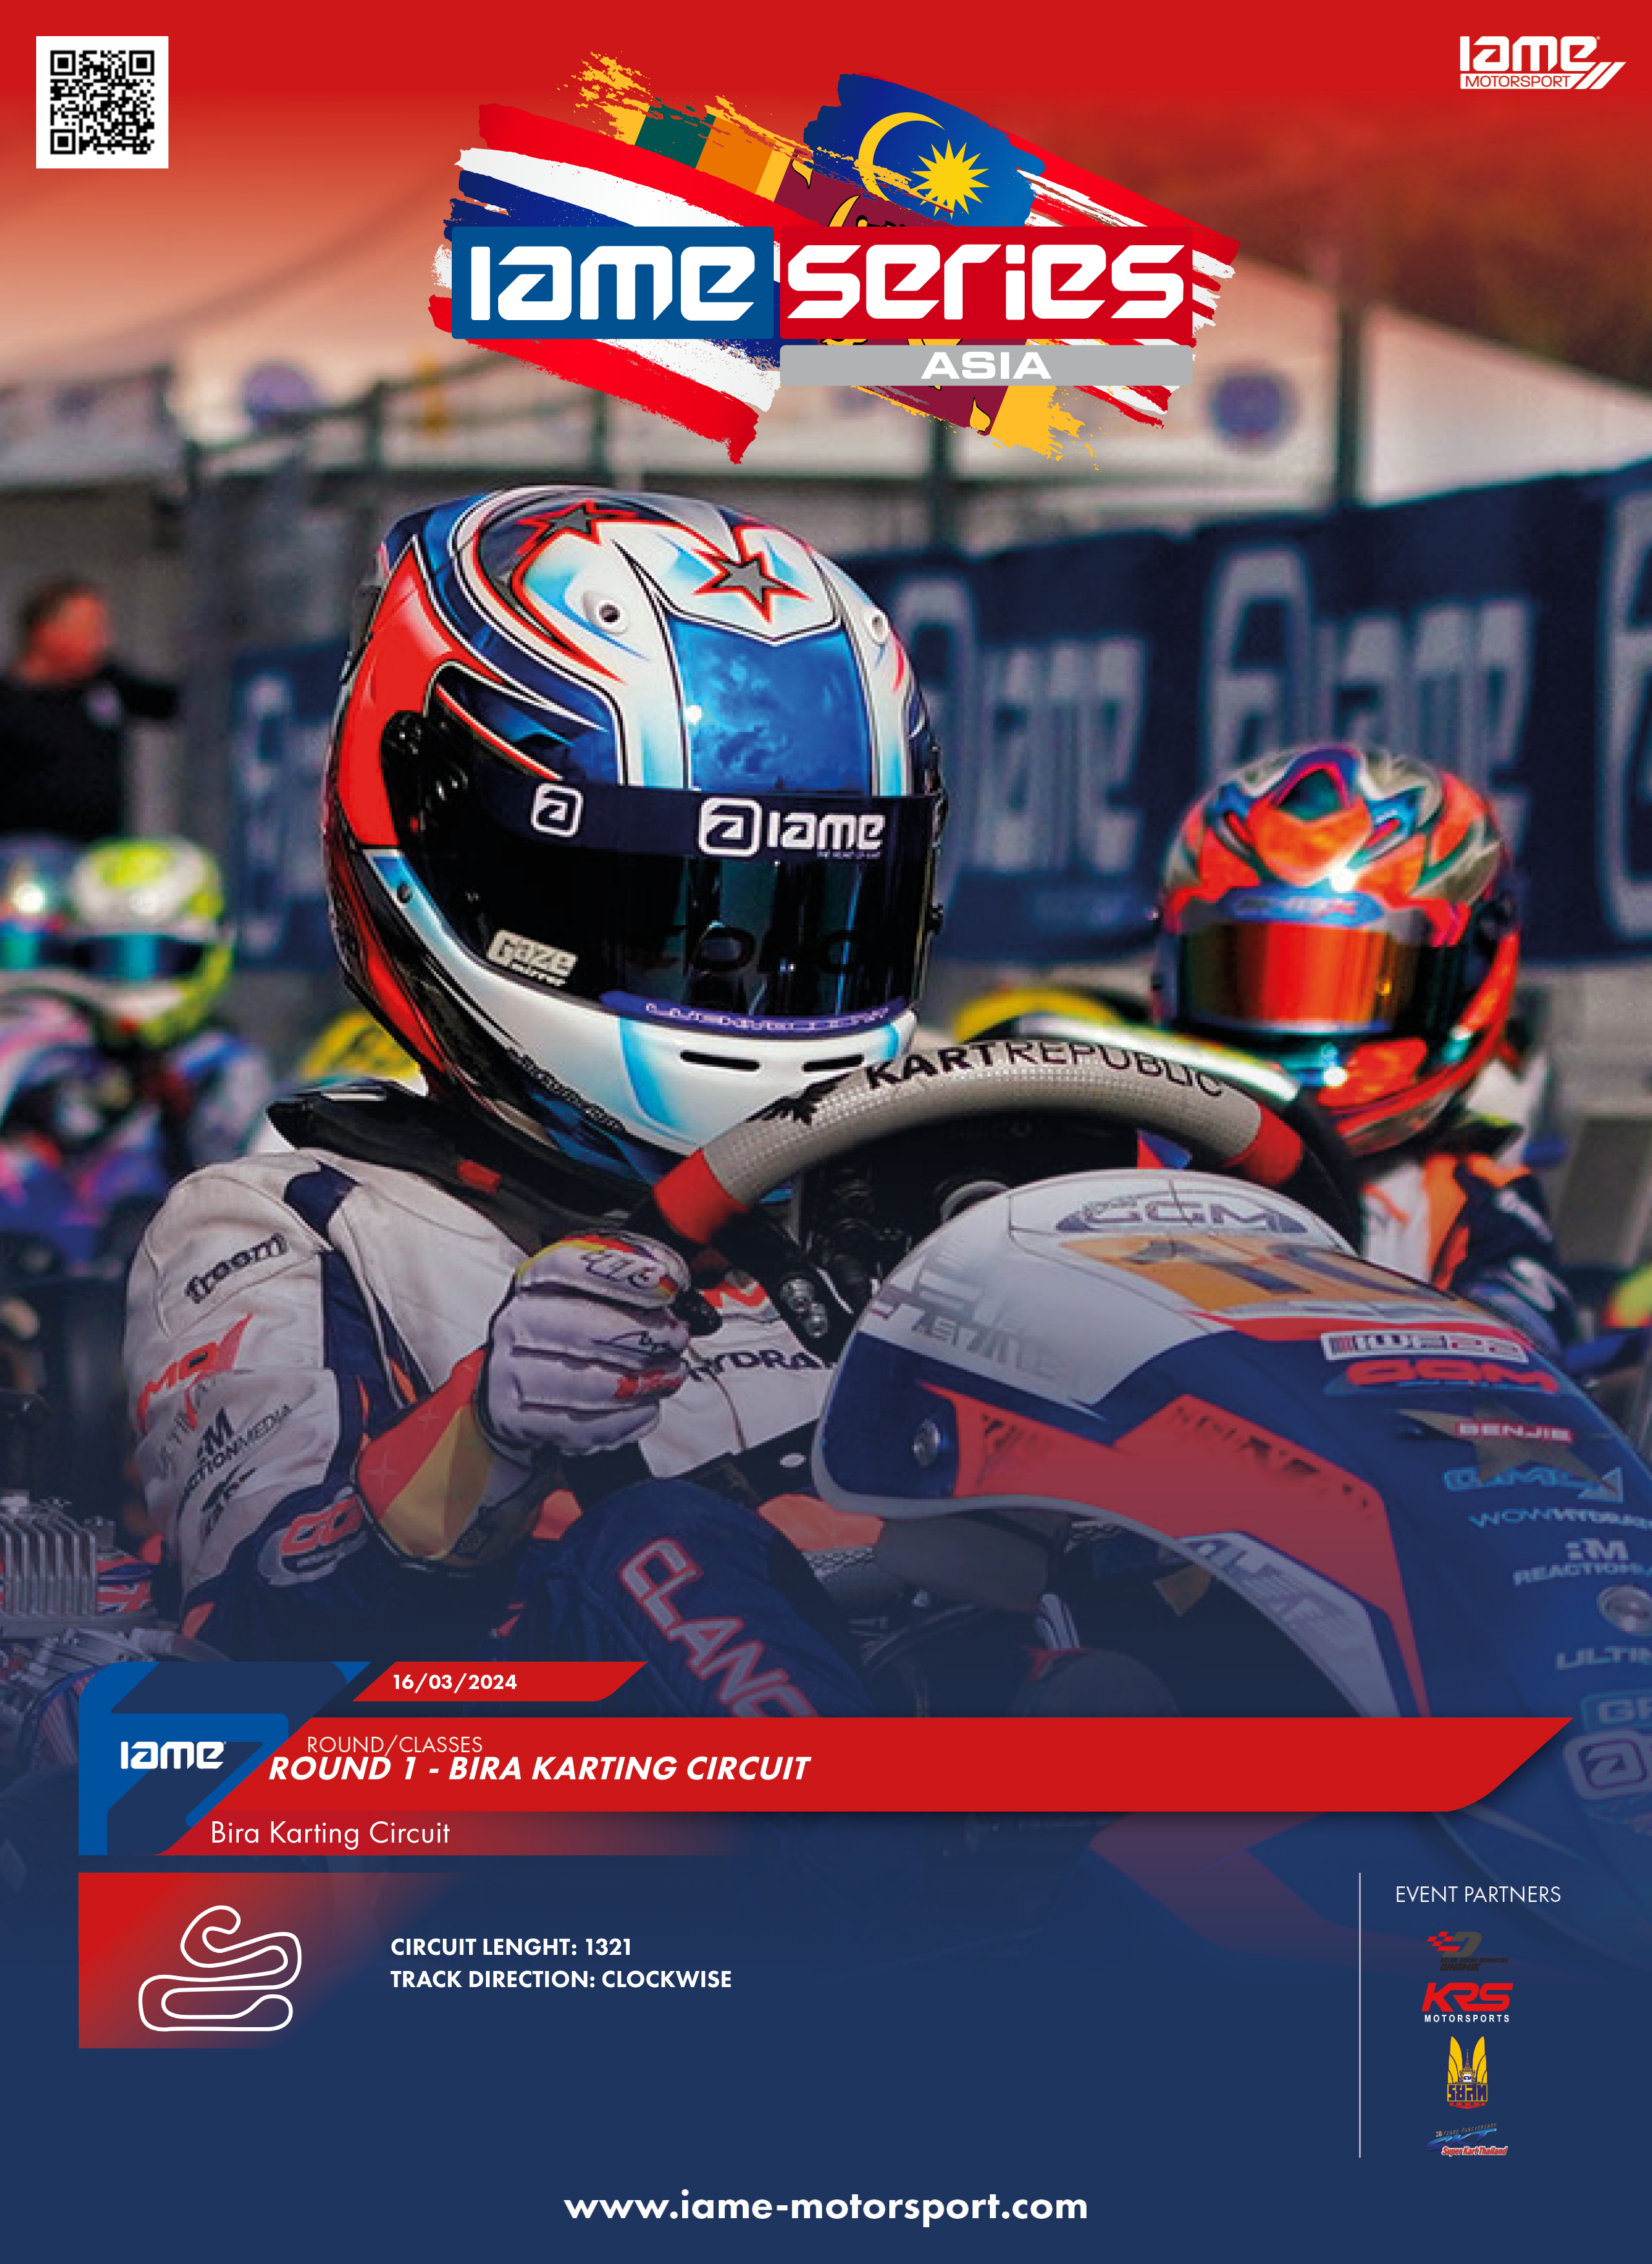 Revving Up for IAME Series Asia: Round 1 Ignition at Bira Karting Circuit